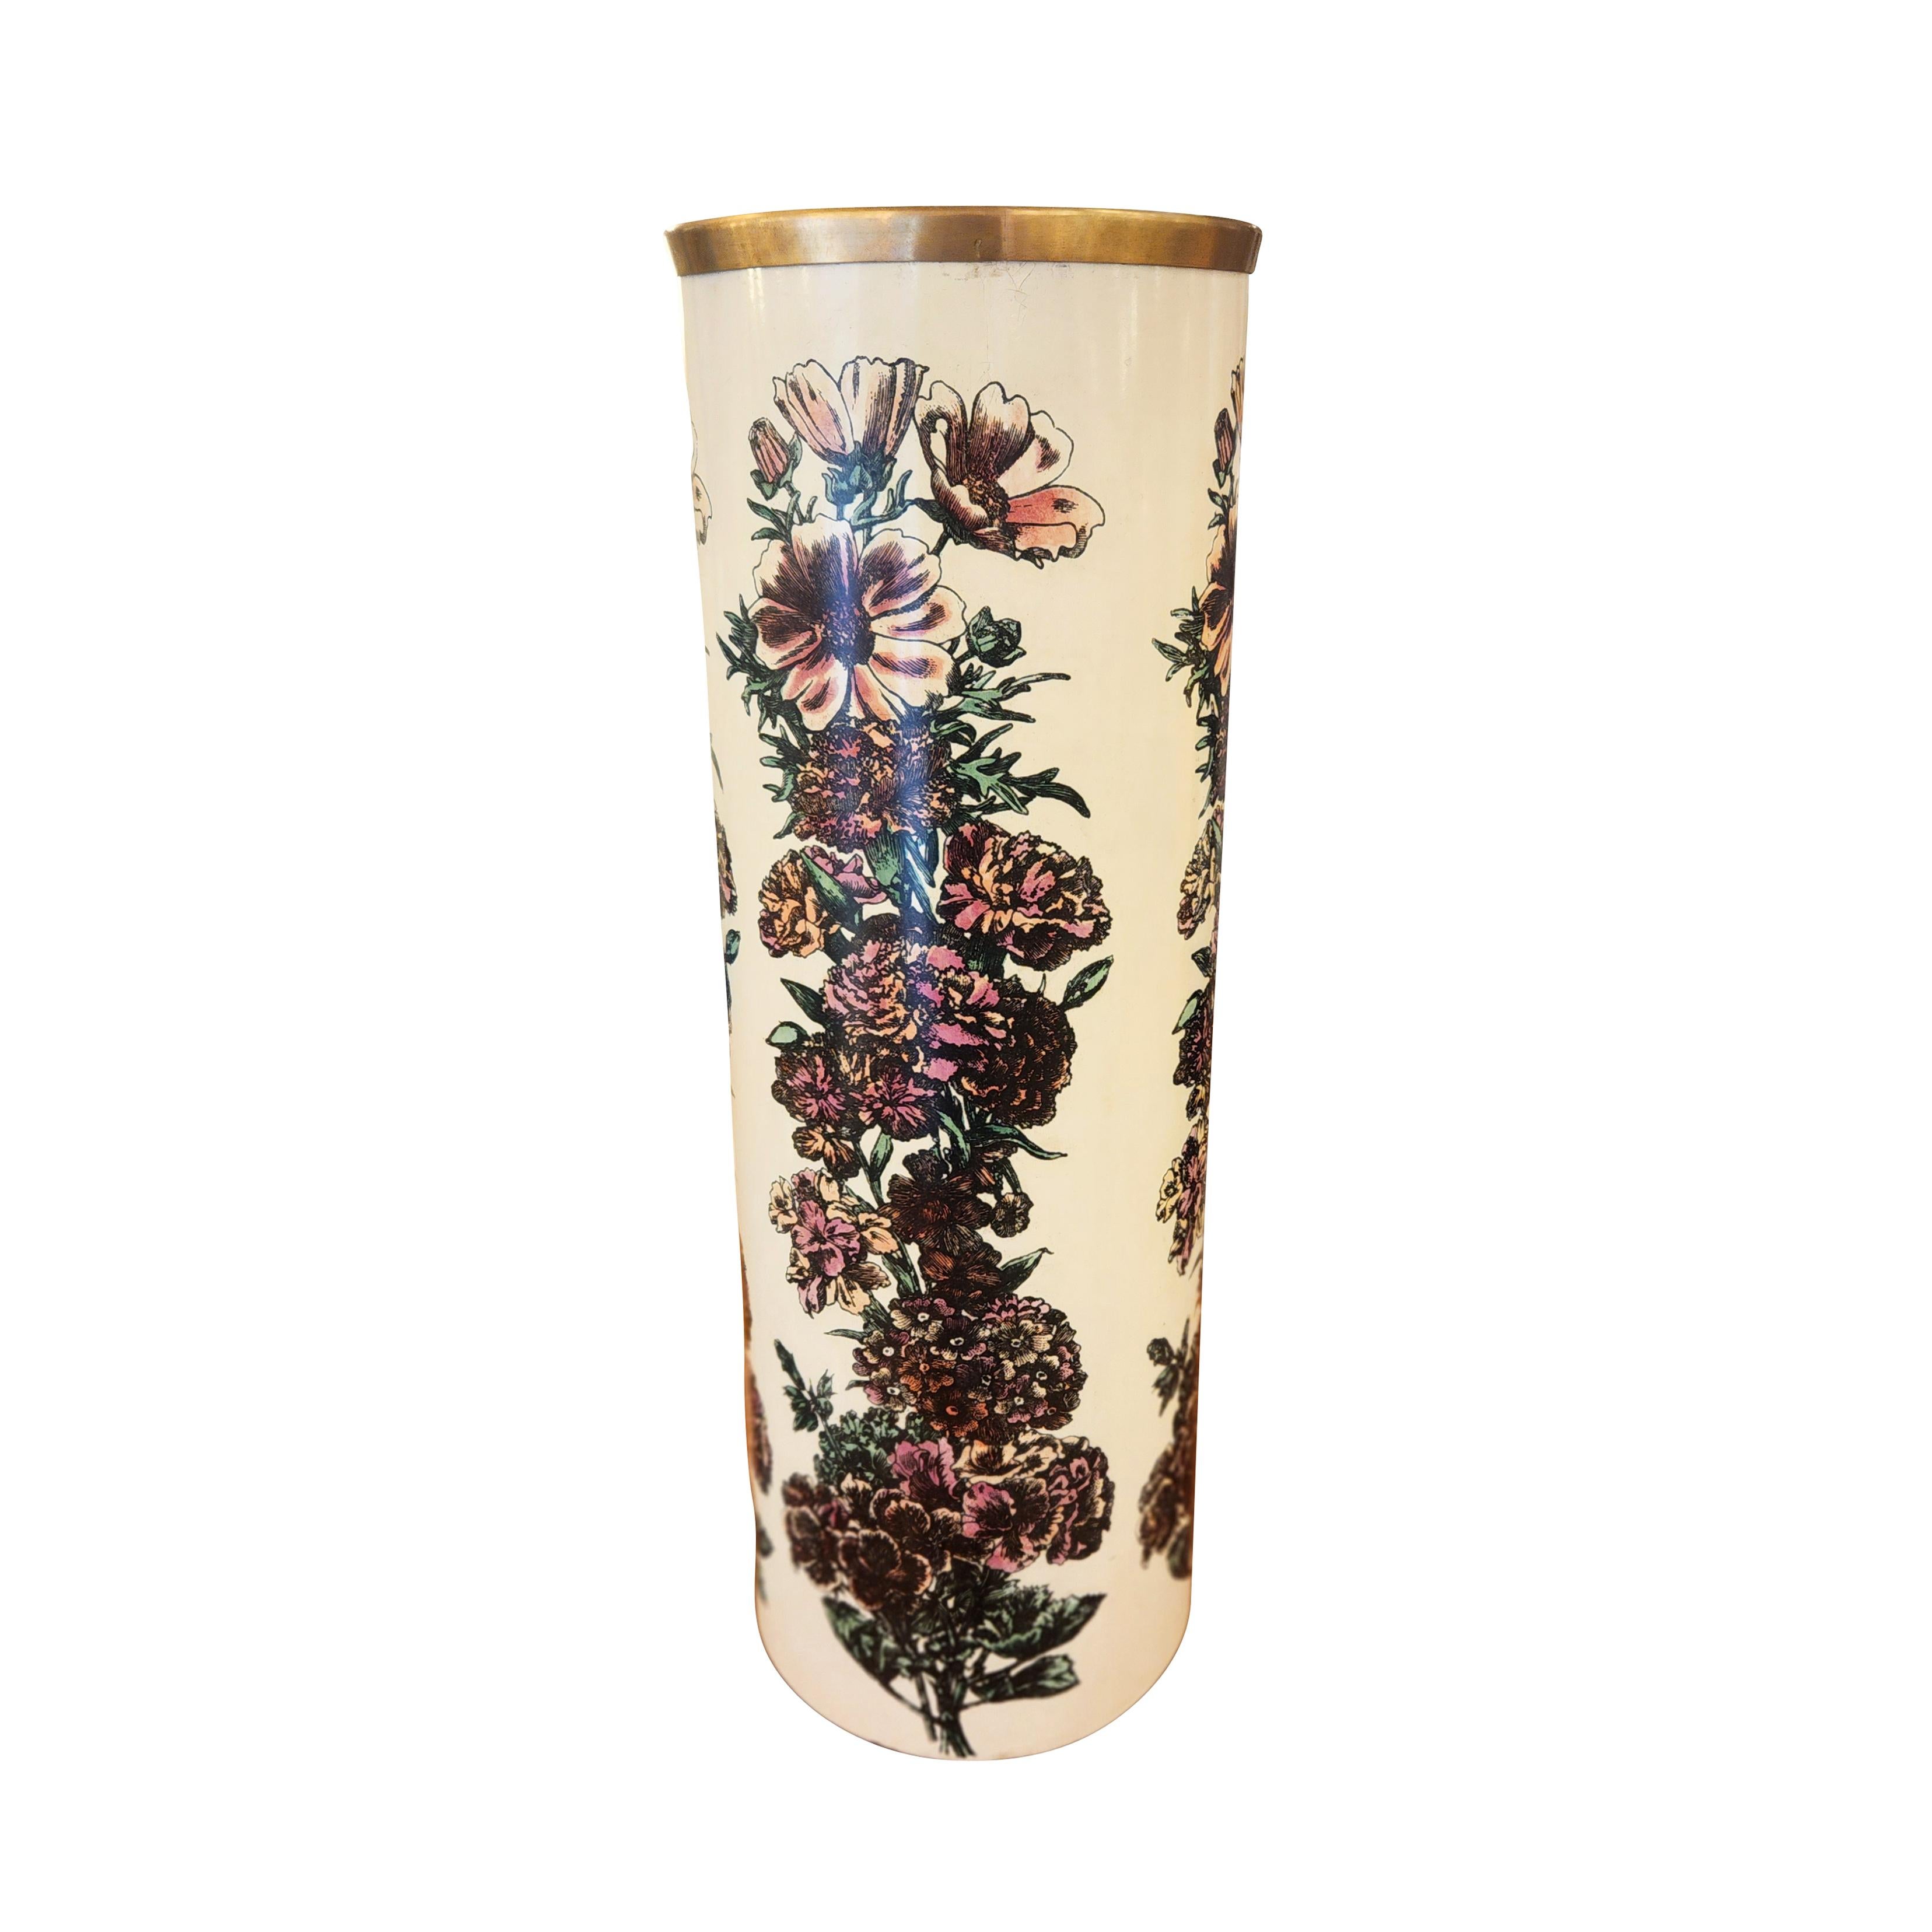 Piero Fornasetti Umbrella Stand with Floral Motif
$3,200.00
Italian Mid-Century umbrella stand by Piero Fornasetti featuring a floral motif on off-white background. Original logo on the bottom.

Condition: Excellent vintage condition, minor wear